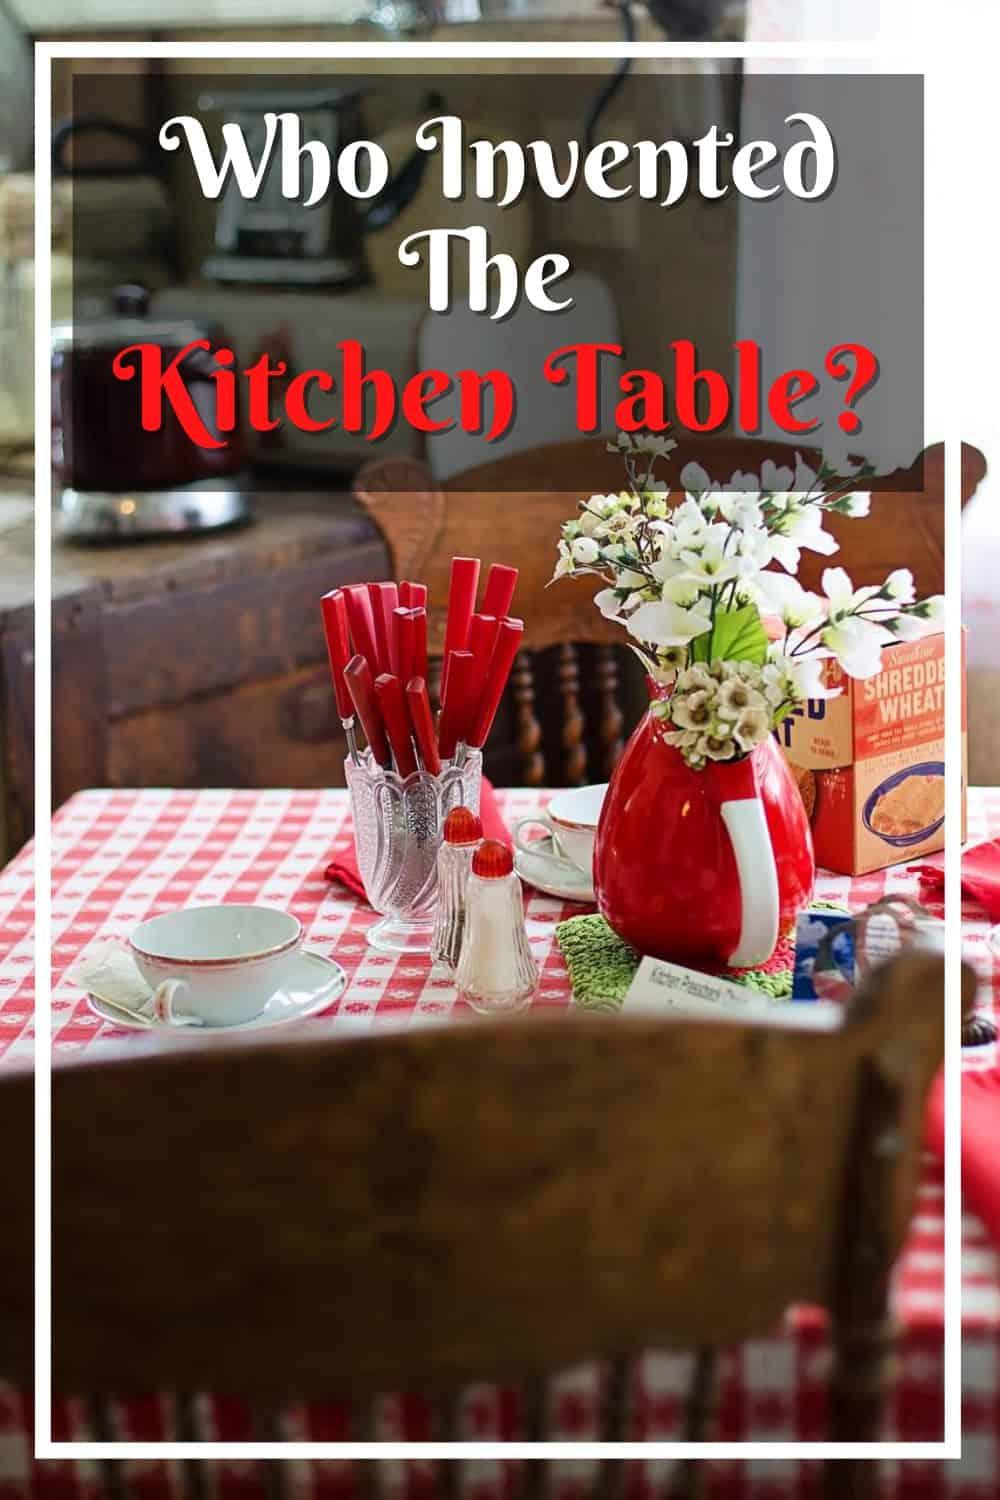 The kitchen table was invented by Henry A Jackson in 1896